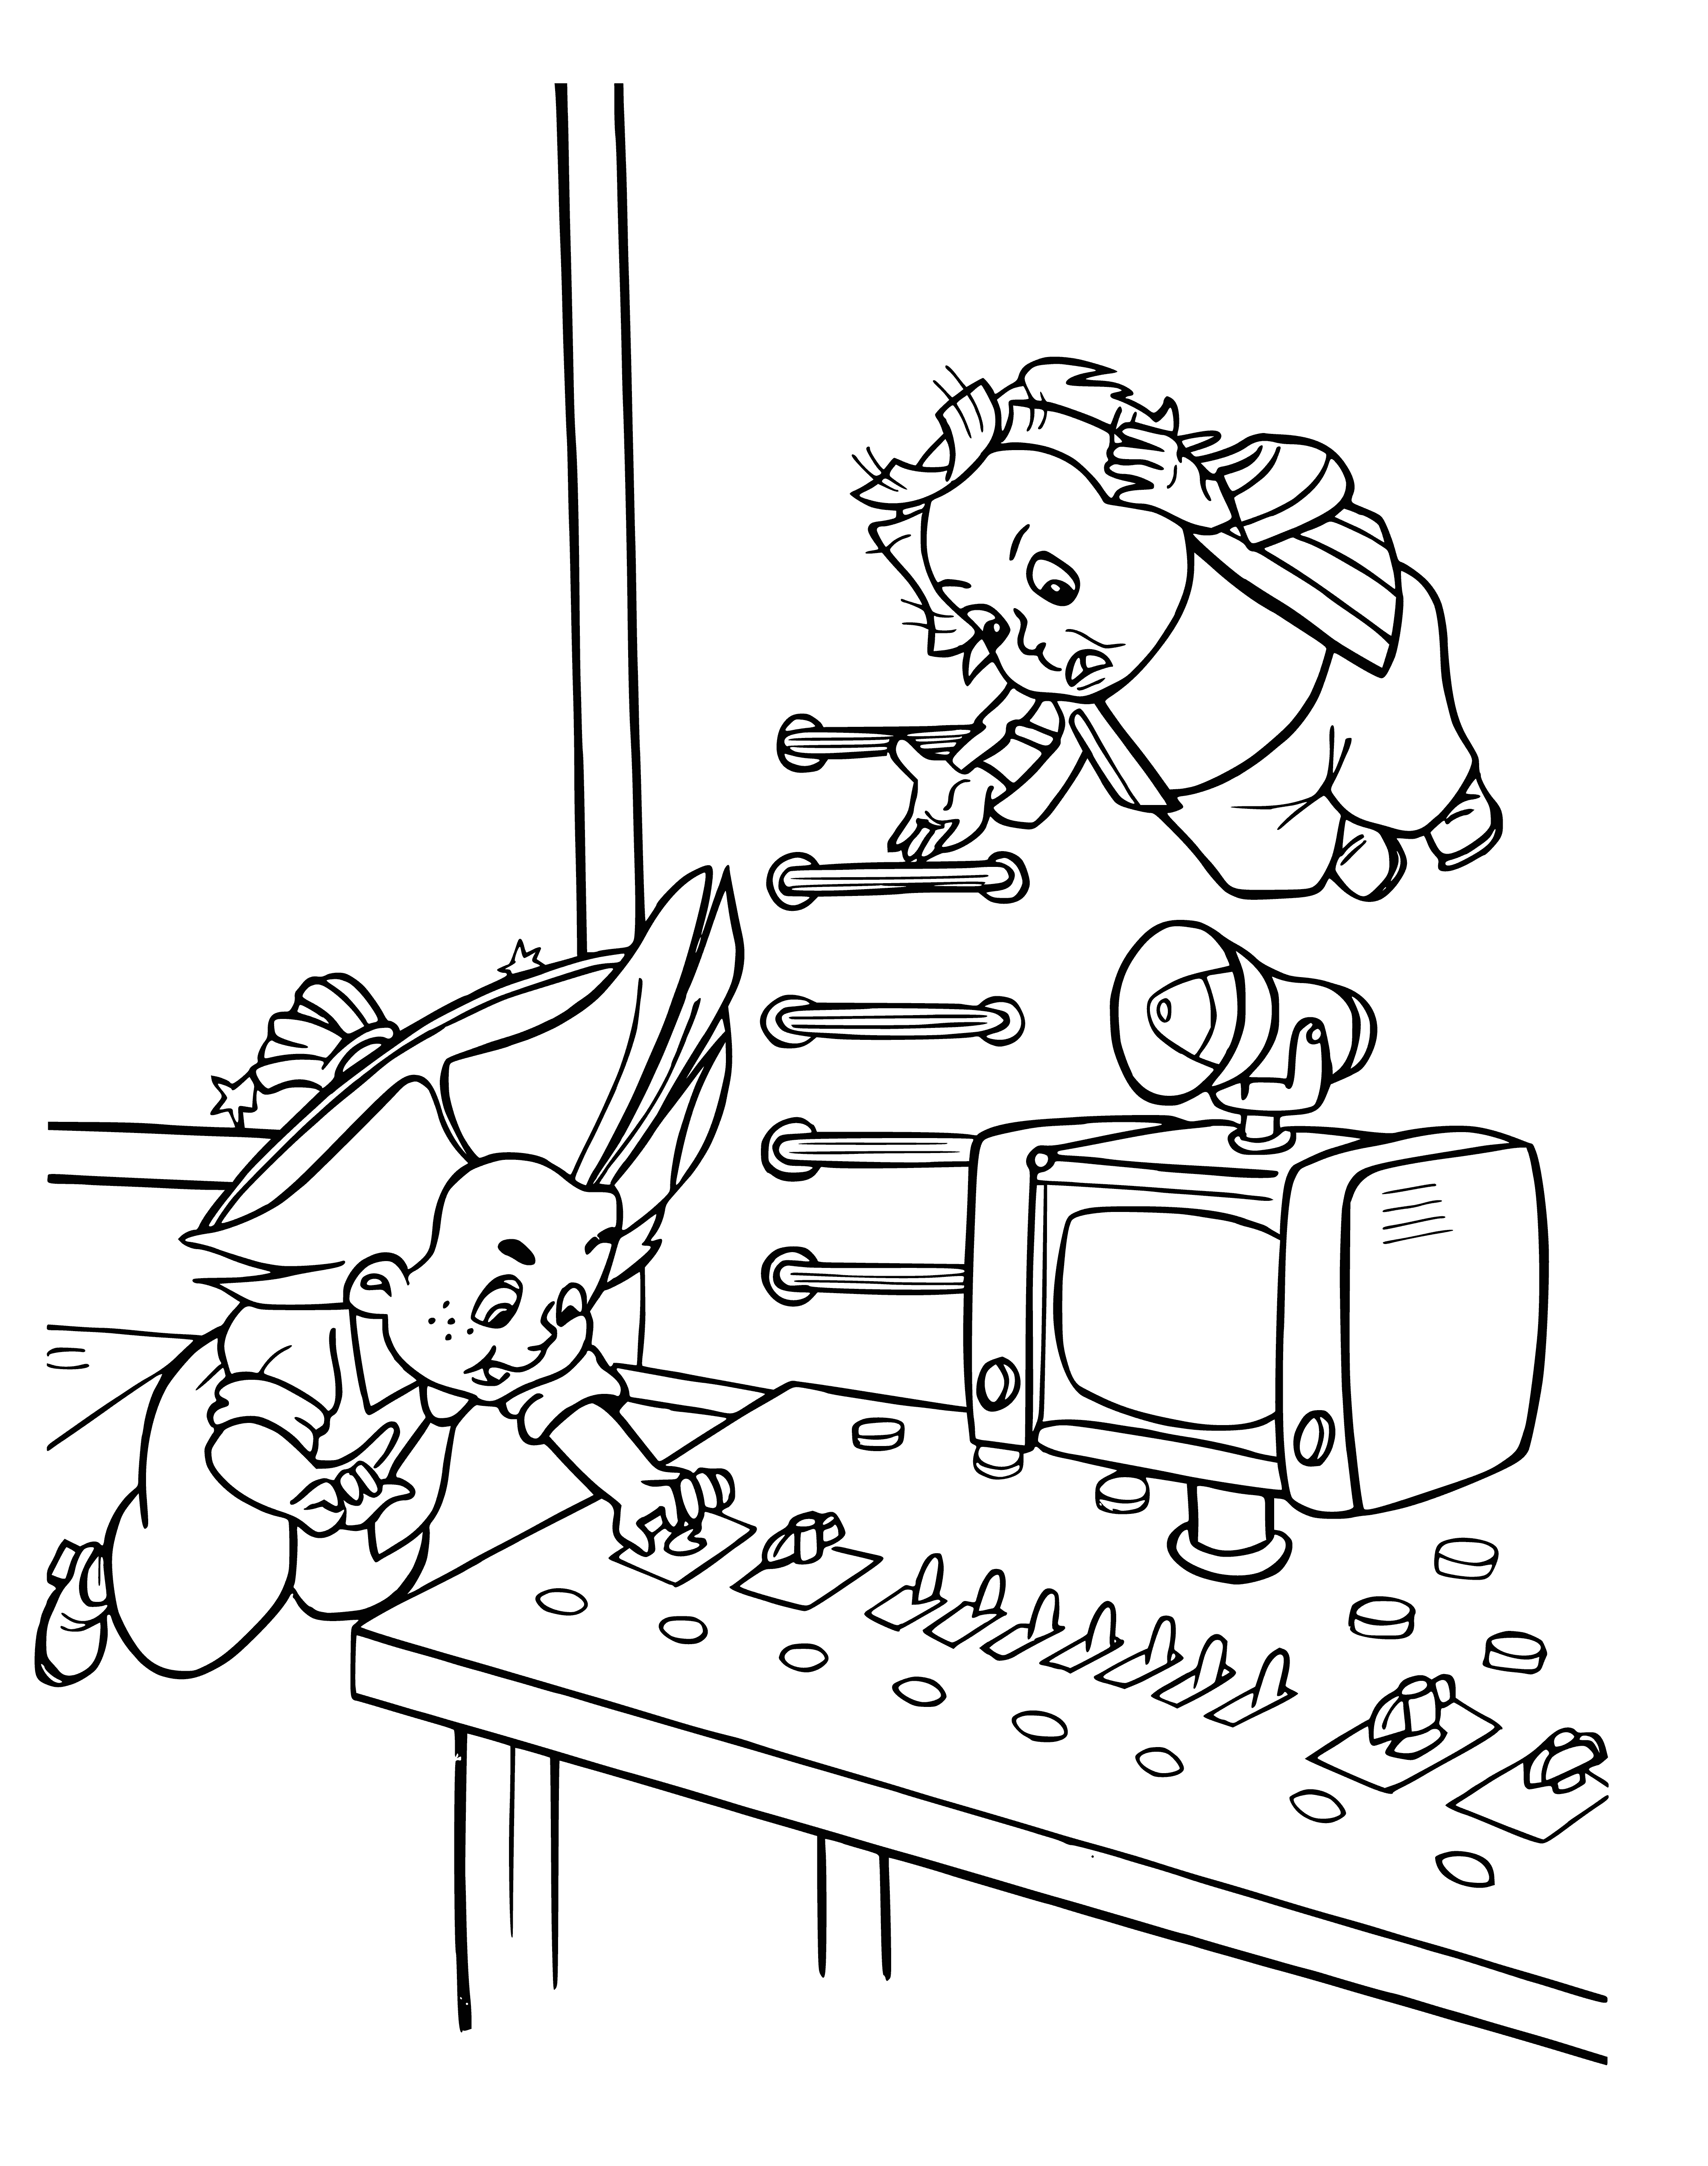 coloring page: Dunno and the computer explore the moon & observe Earth; the computer converses with Dunno.